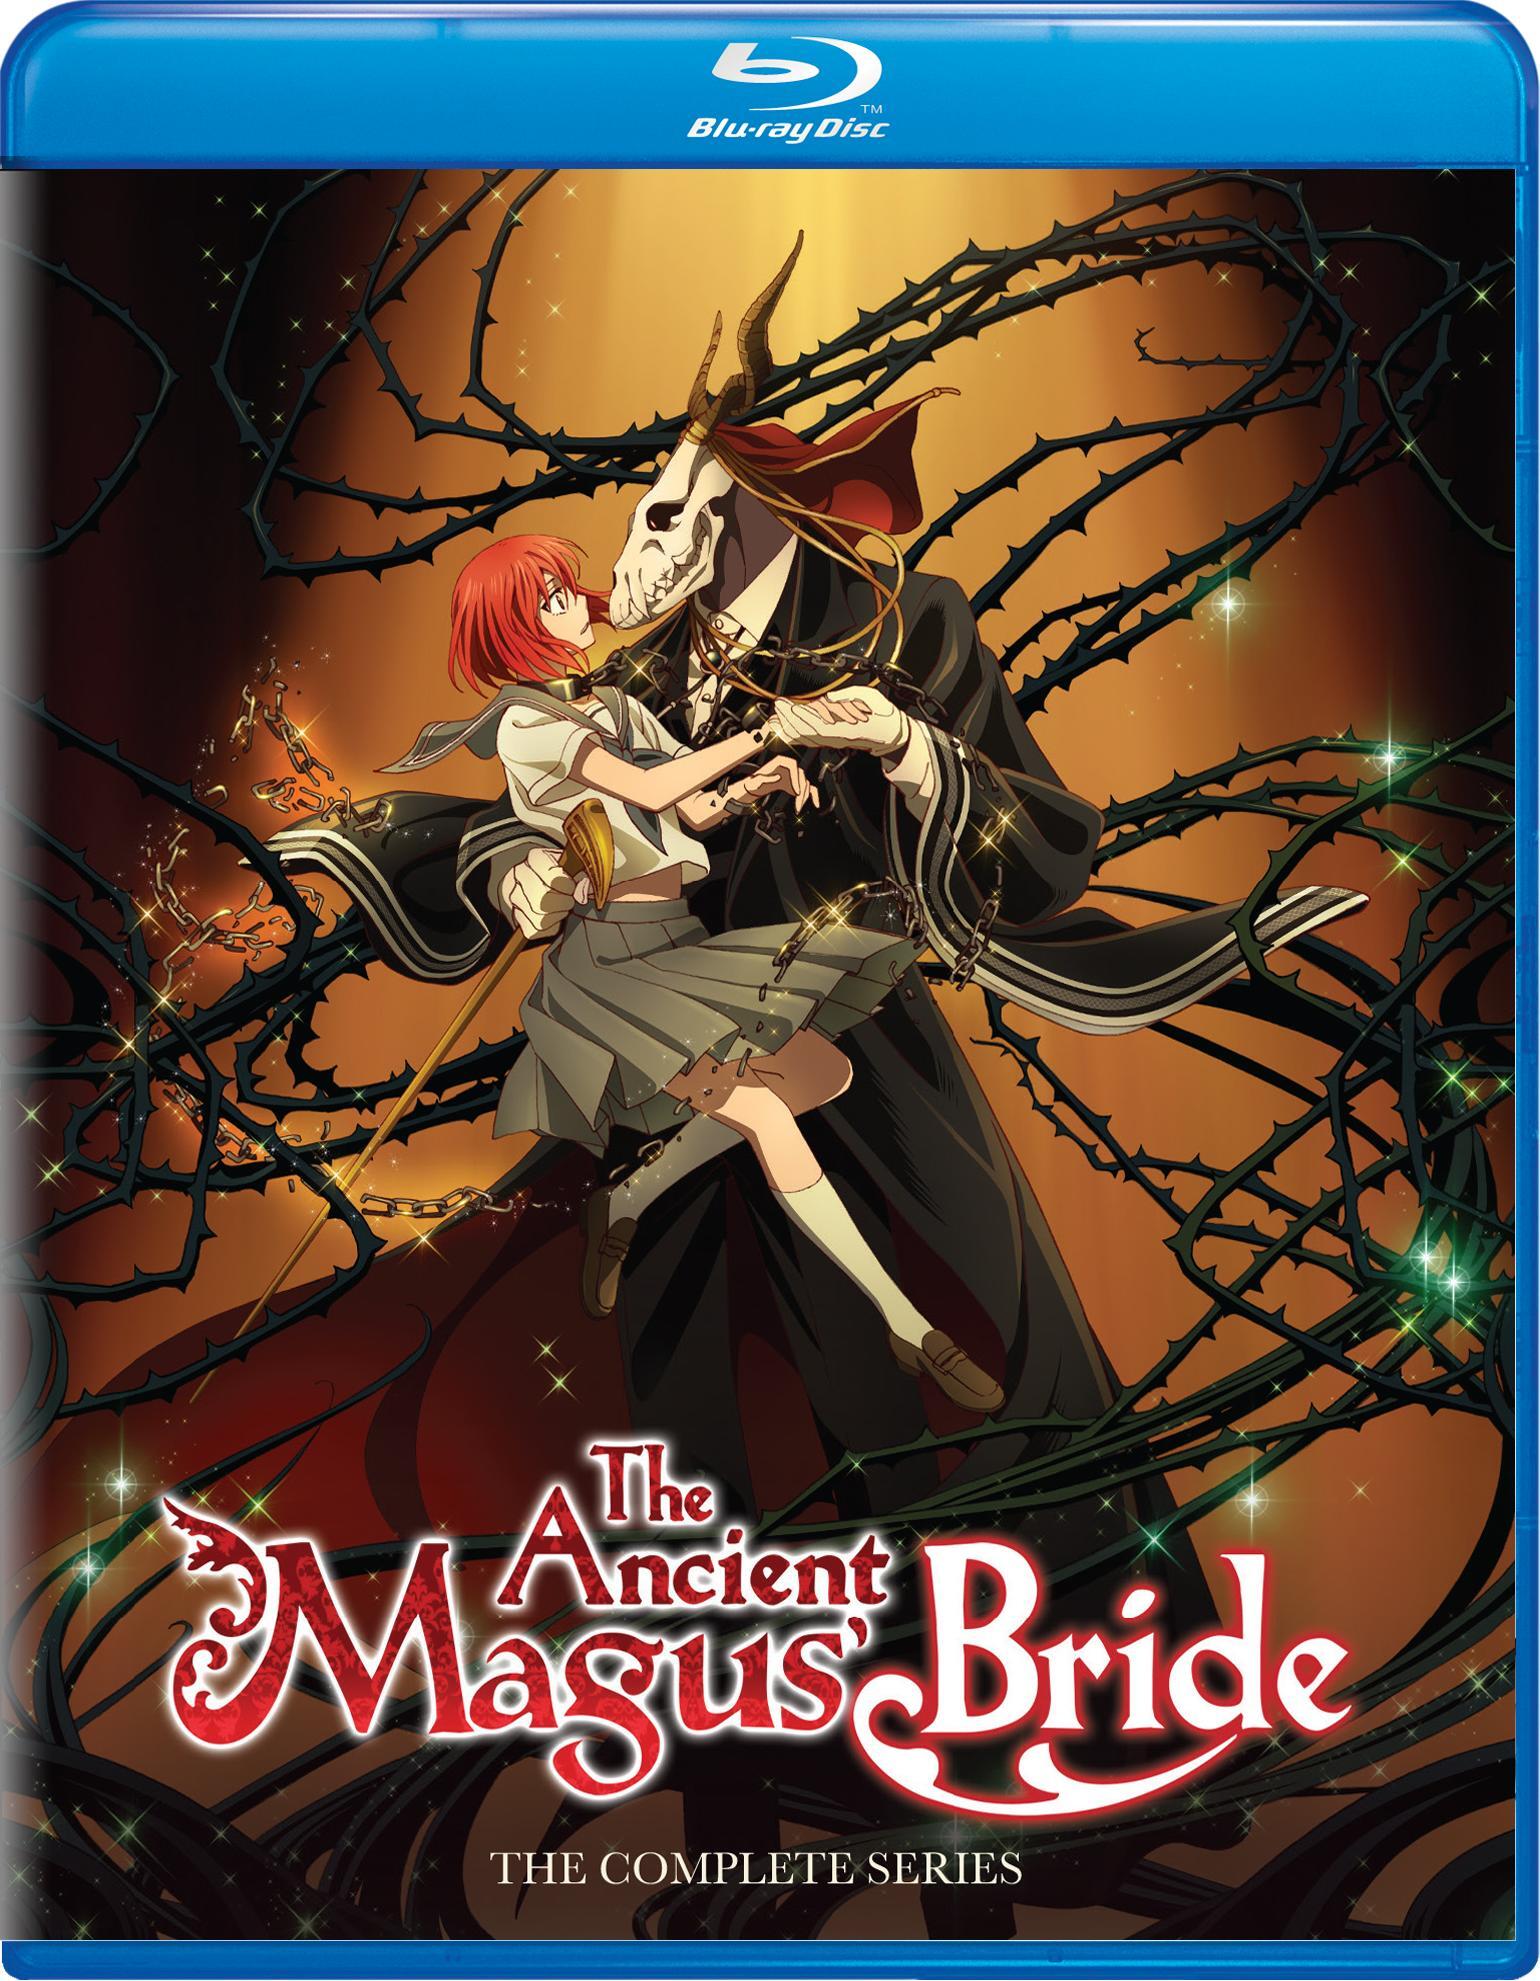 The Ancient Magus' Bride: The Complete Series (Blu-ray + Digital Copy) - Blu-ray [ 2018 ]